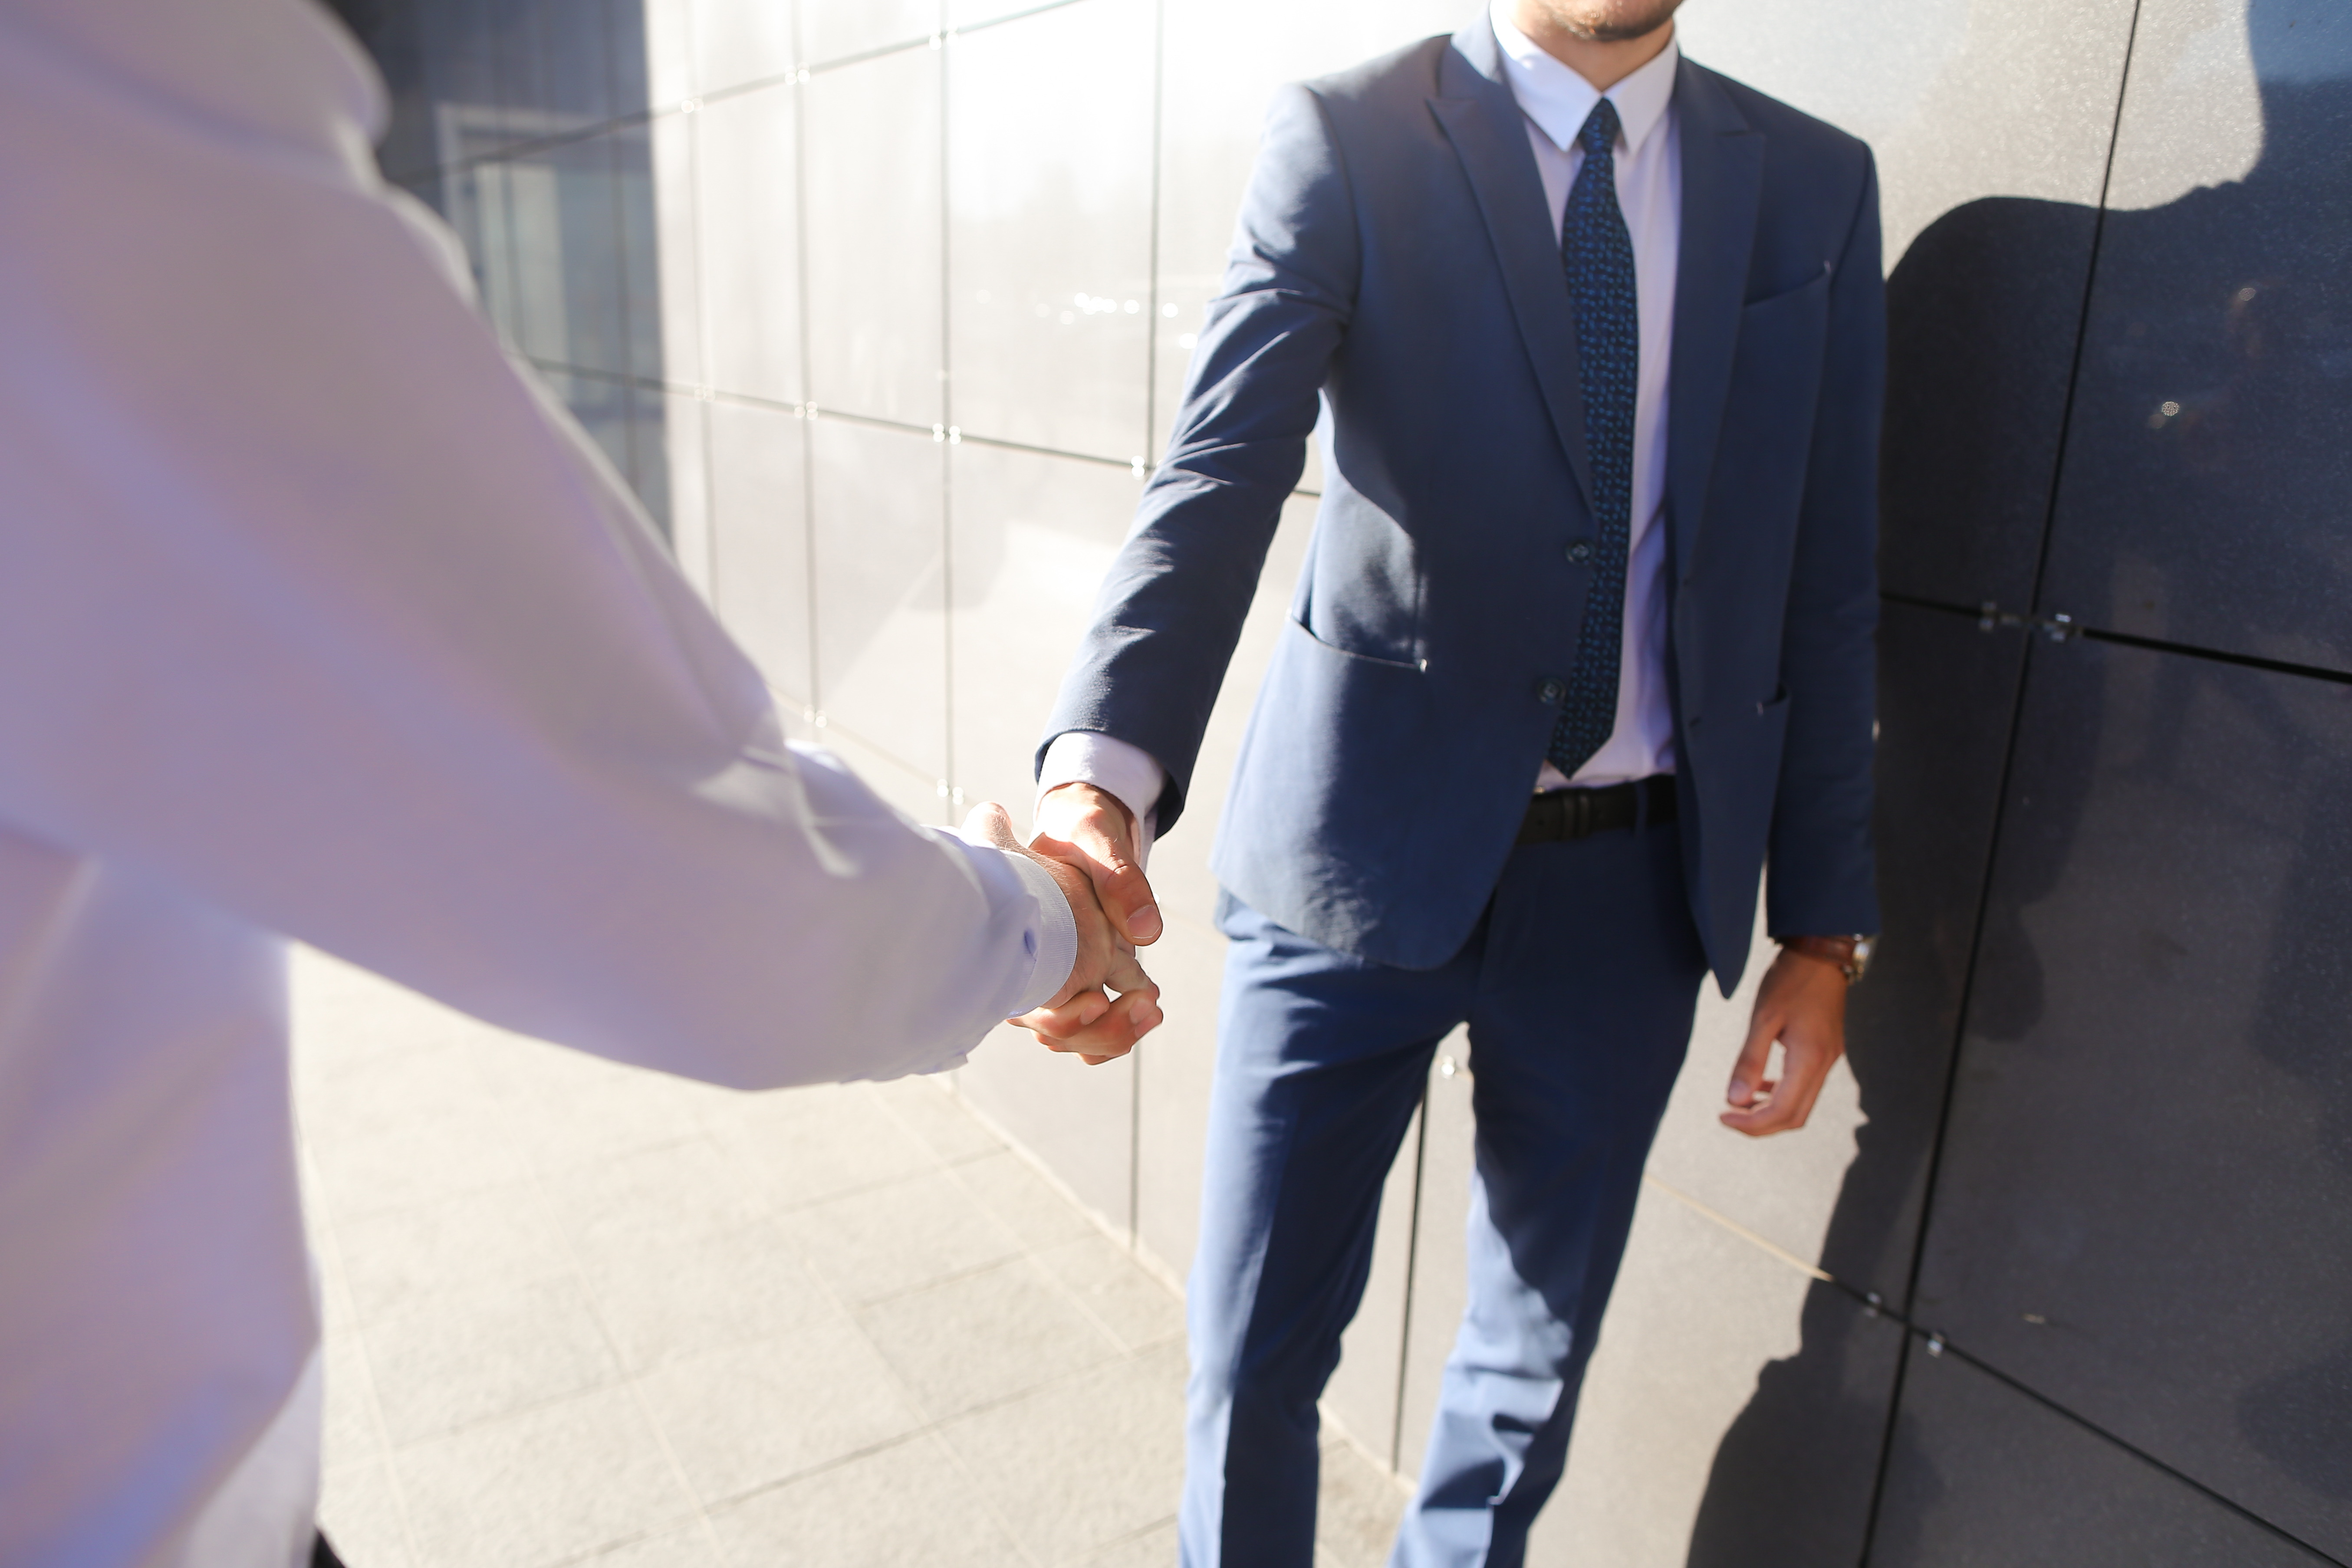 Friends met and greet each other with handshake near gray wall of business center outdoors. | Source: Shutterstock